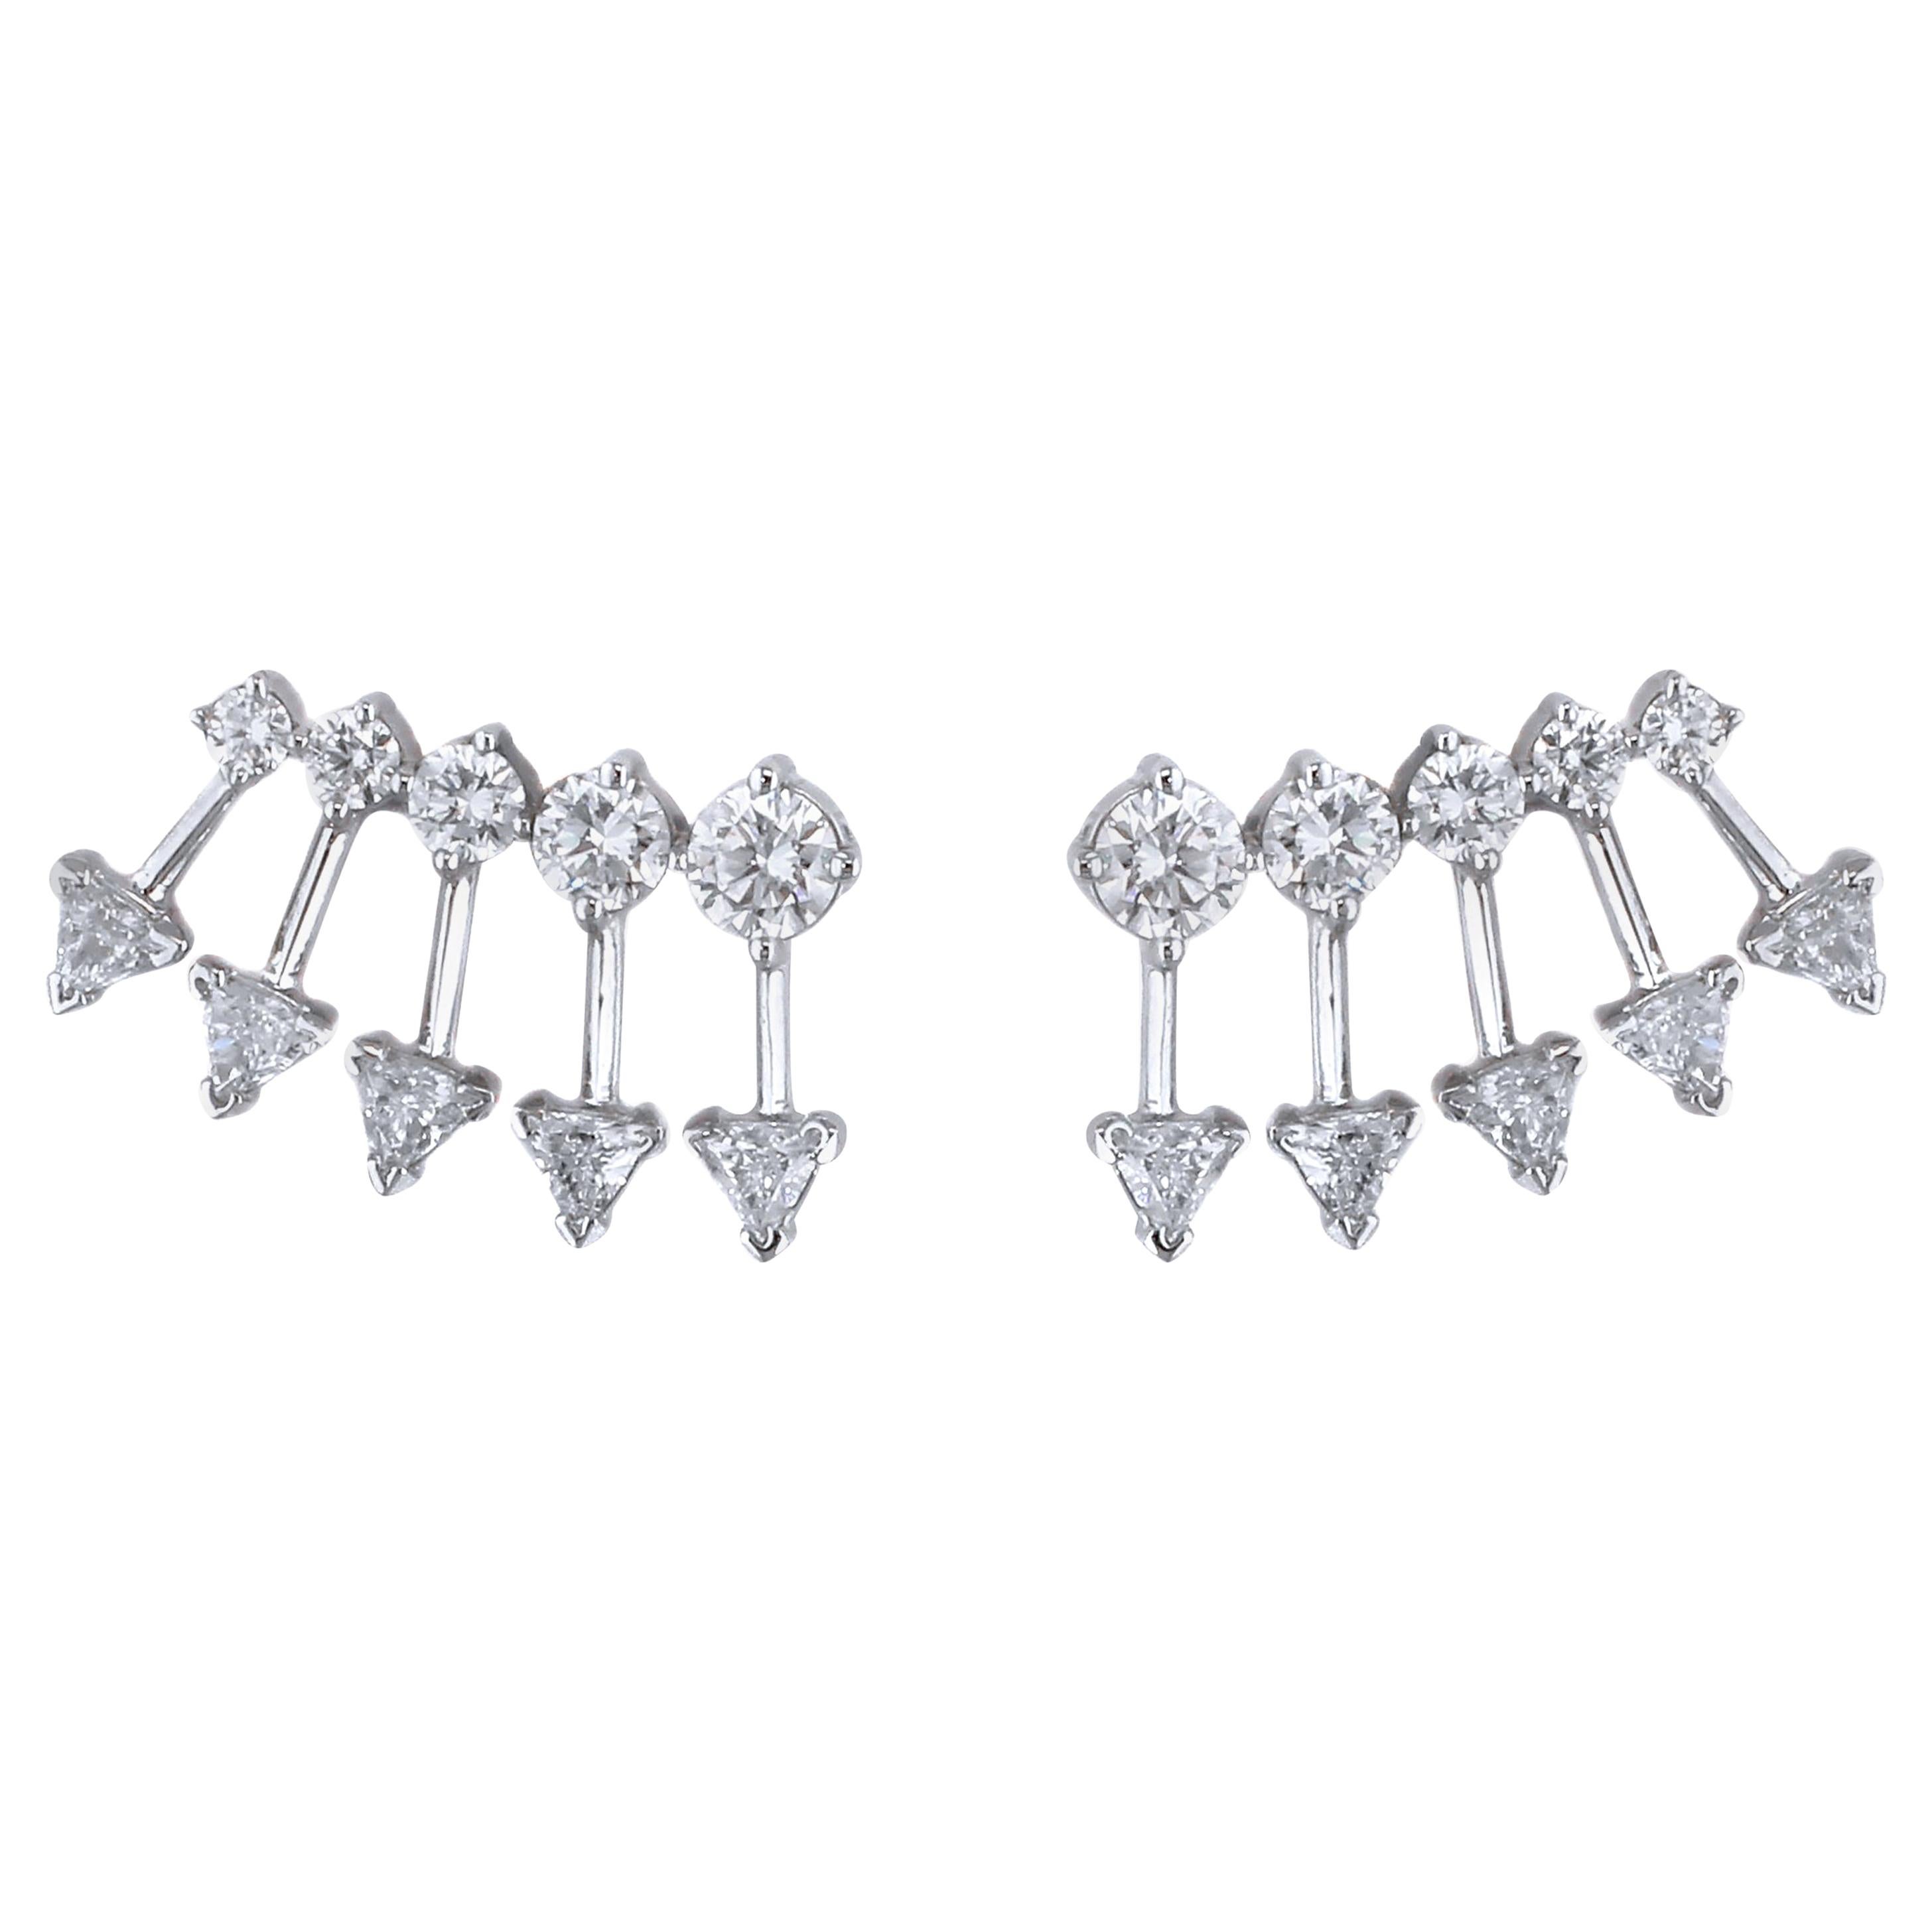 18 Karat Gold and 2.01 Carat Colorless Diamond Spear Earrings by Alessa Jewelry For Sale